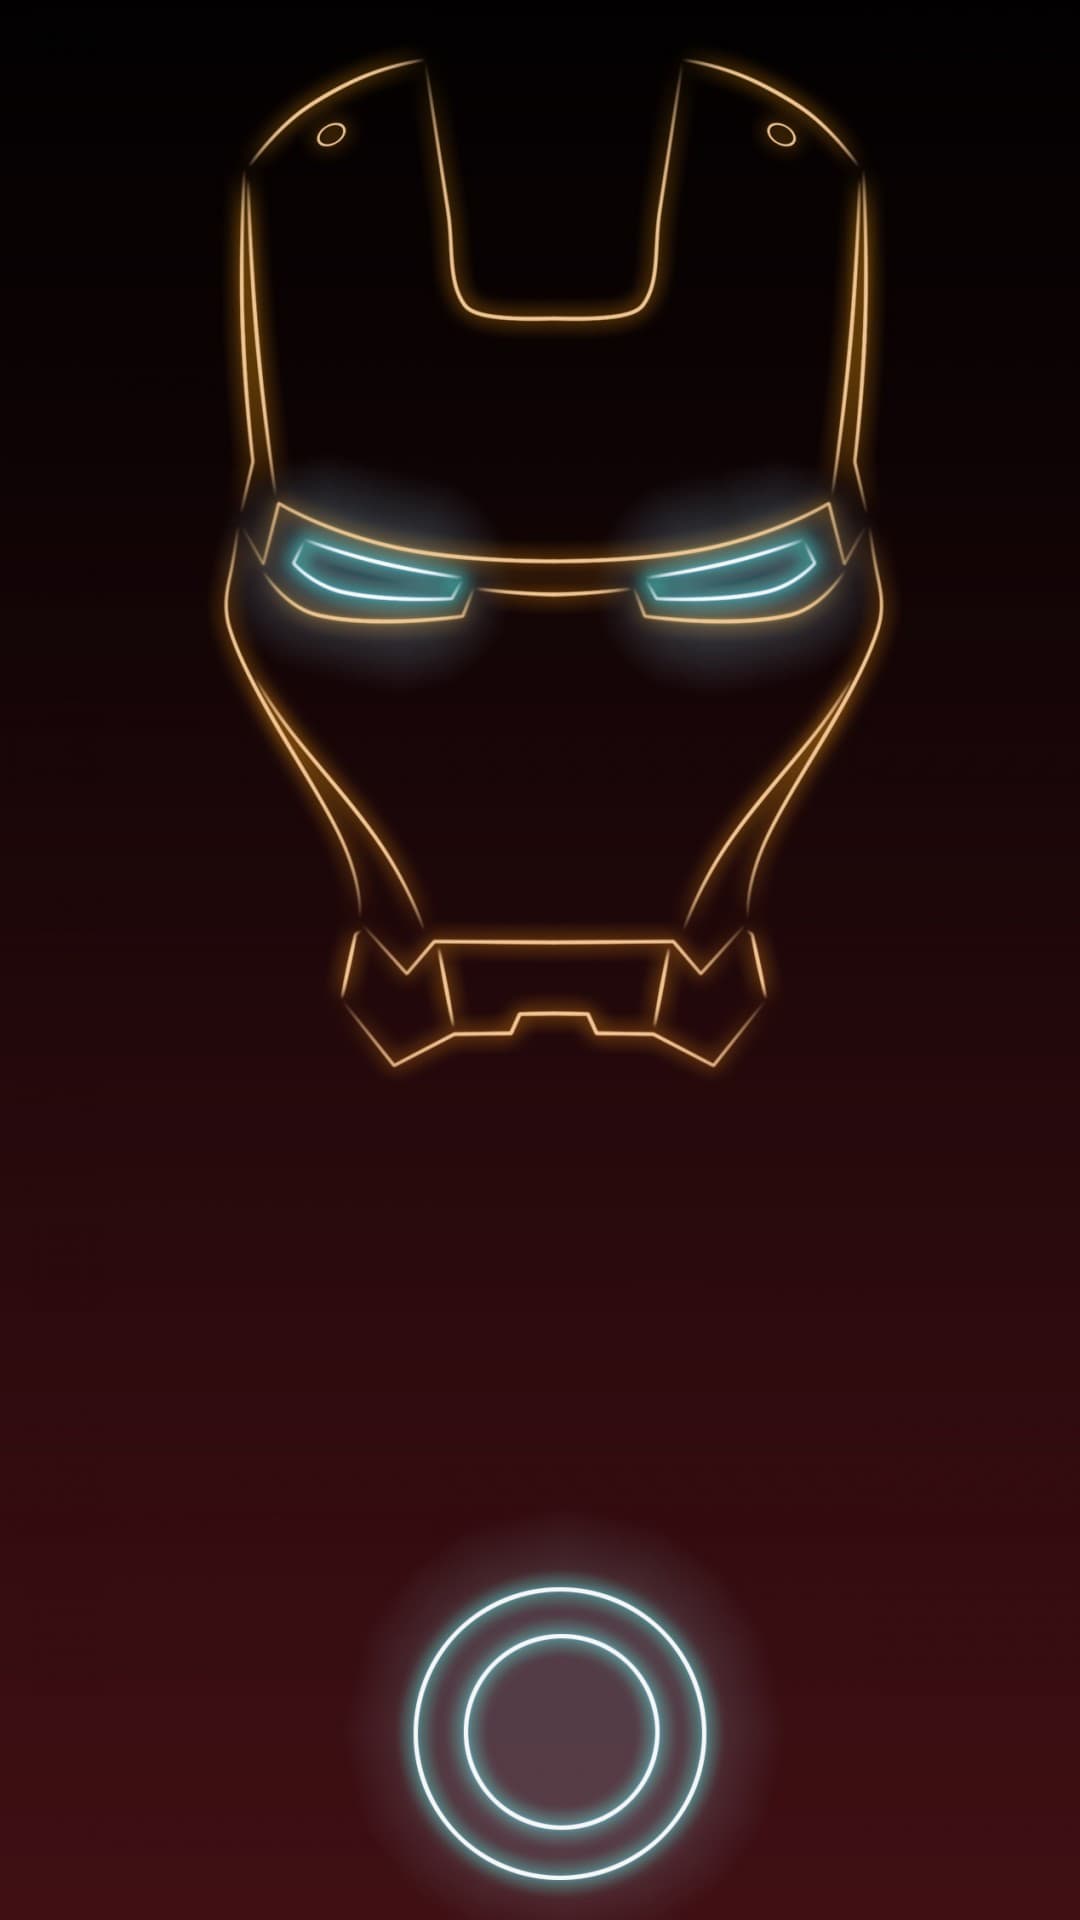 WallpapersWide.com : Iron Man Ultra HD Wallpapers for UHD, Widescreen,  UltraWide & Multi Display Desktop, Tablet & Smartphone | Page 1